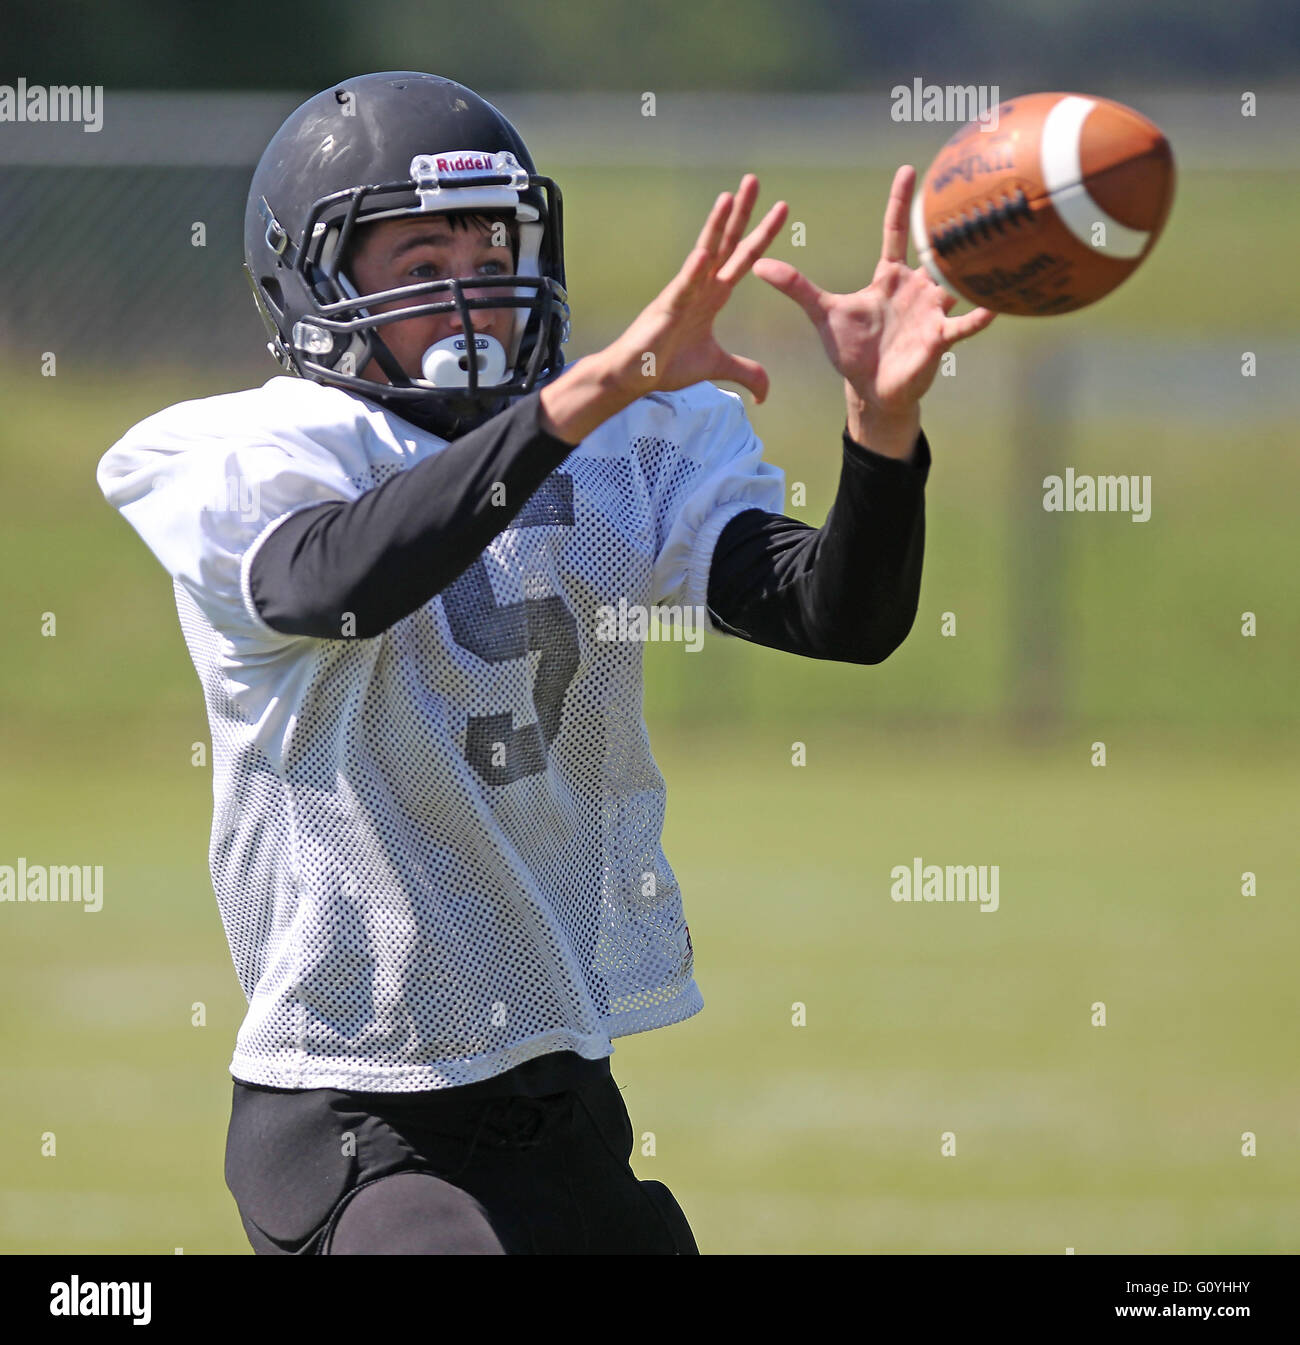 New Port Richey, Florida, USA. 5th May, 2016. BRENDAN FITTERER | Times.Mitchell High School's WR Mason Castricone works out during spring football practice Thursday (5/5/16) © Brendan Fitterer/Tampa Bay Times/ZUMA Wire/Alamy Live News Stock Photo